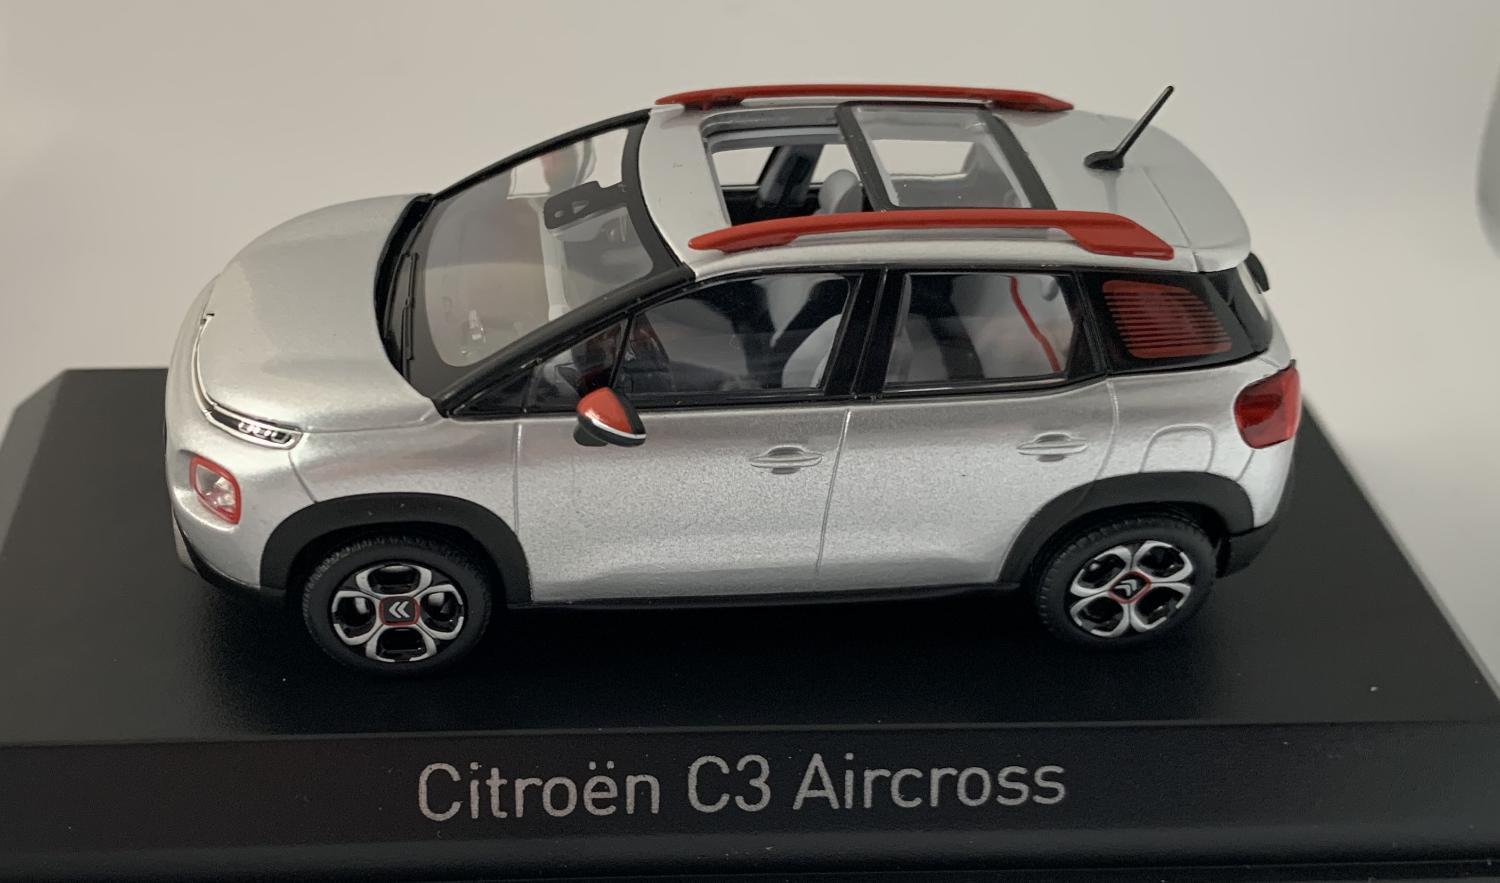 Citroen C3 Aircross 2017 in cosmic silver 1:43 scale model from Norev